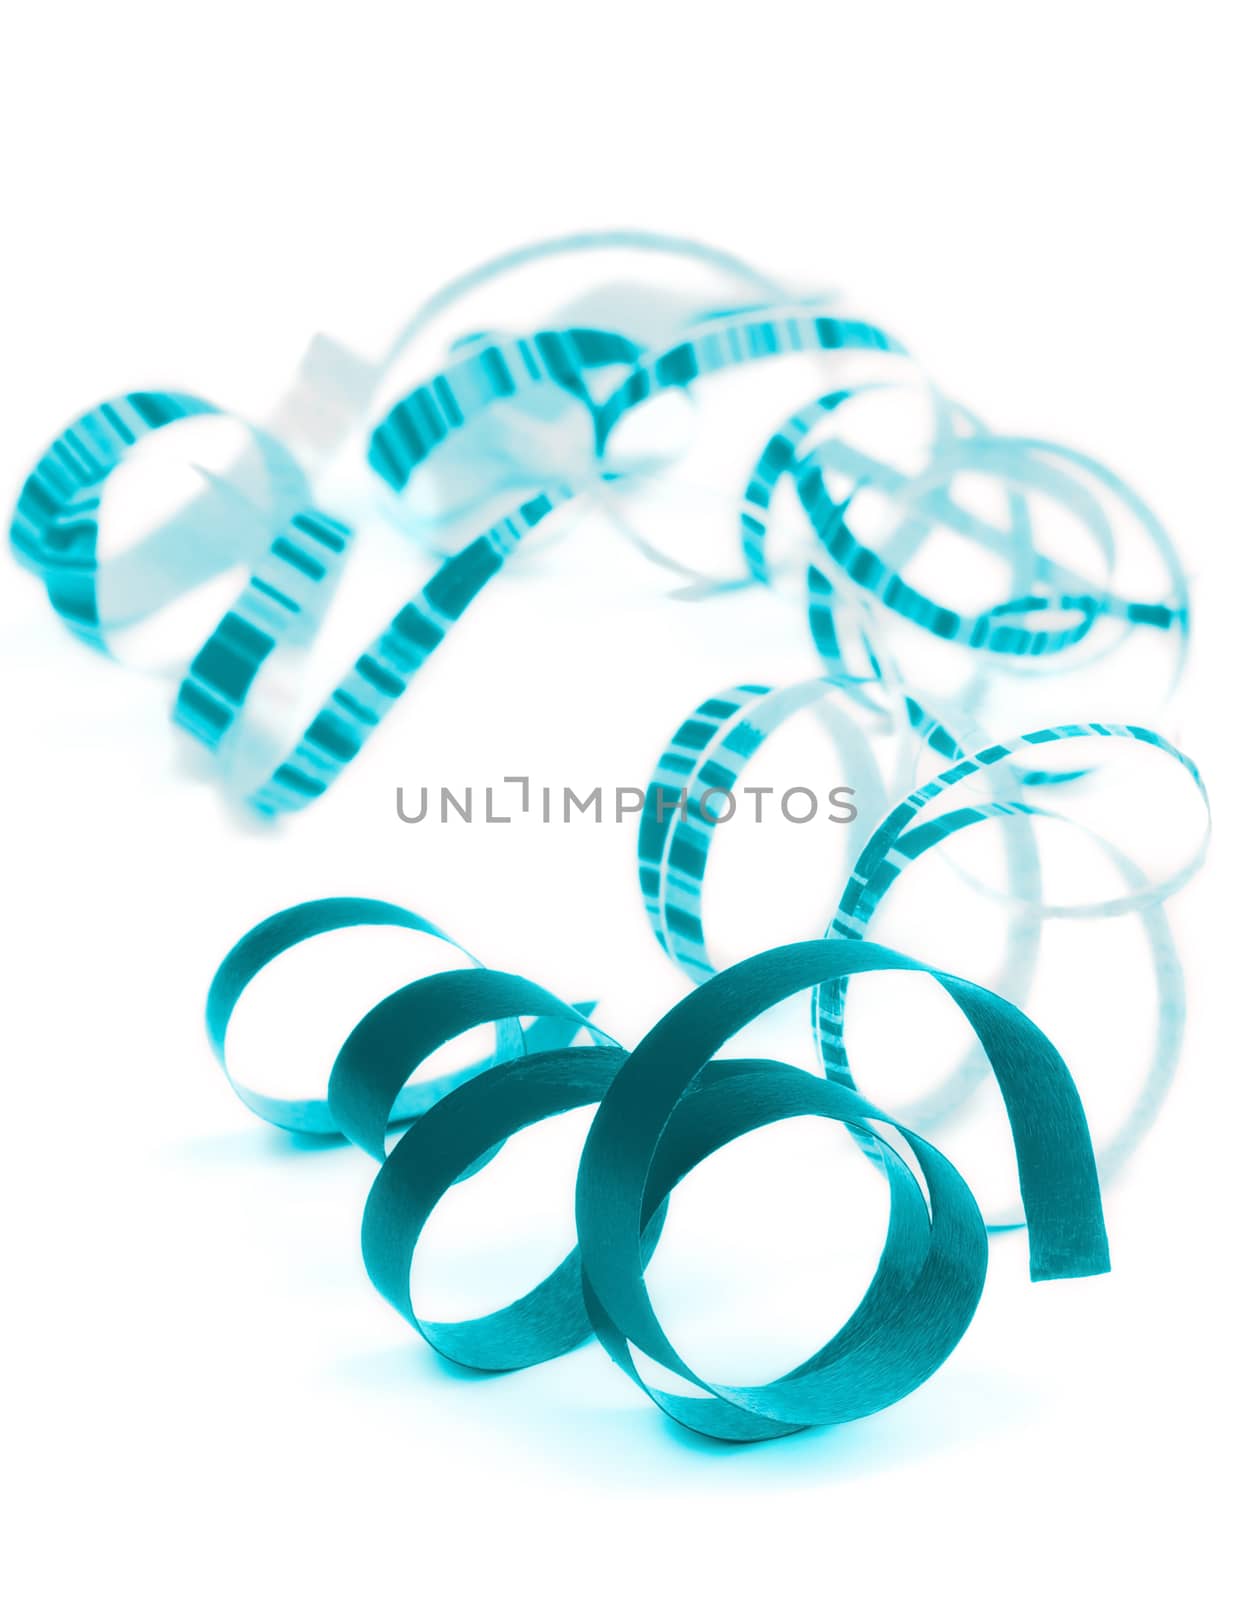 Arrangement of Blue and Striped Curled Party Streamers Lying on white background. Focus on Foreground